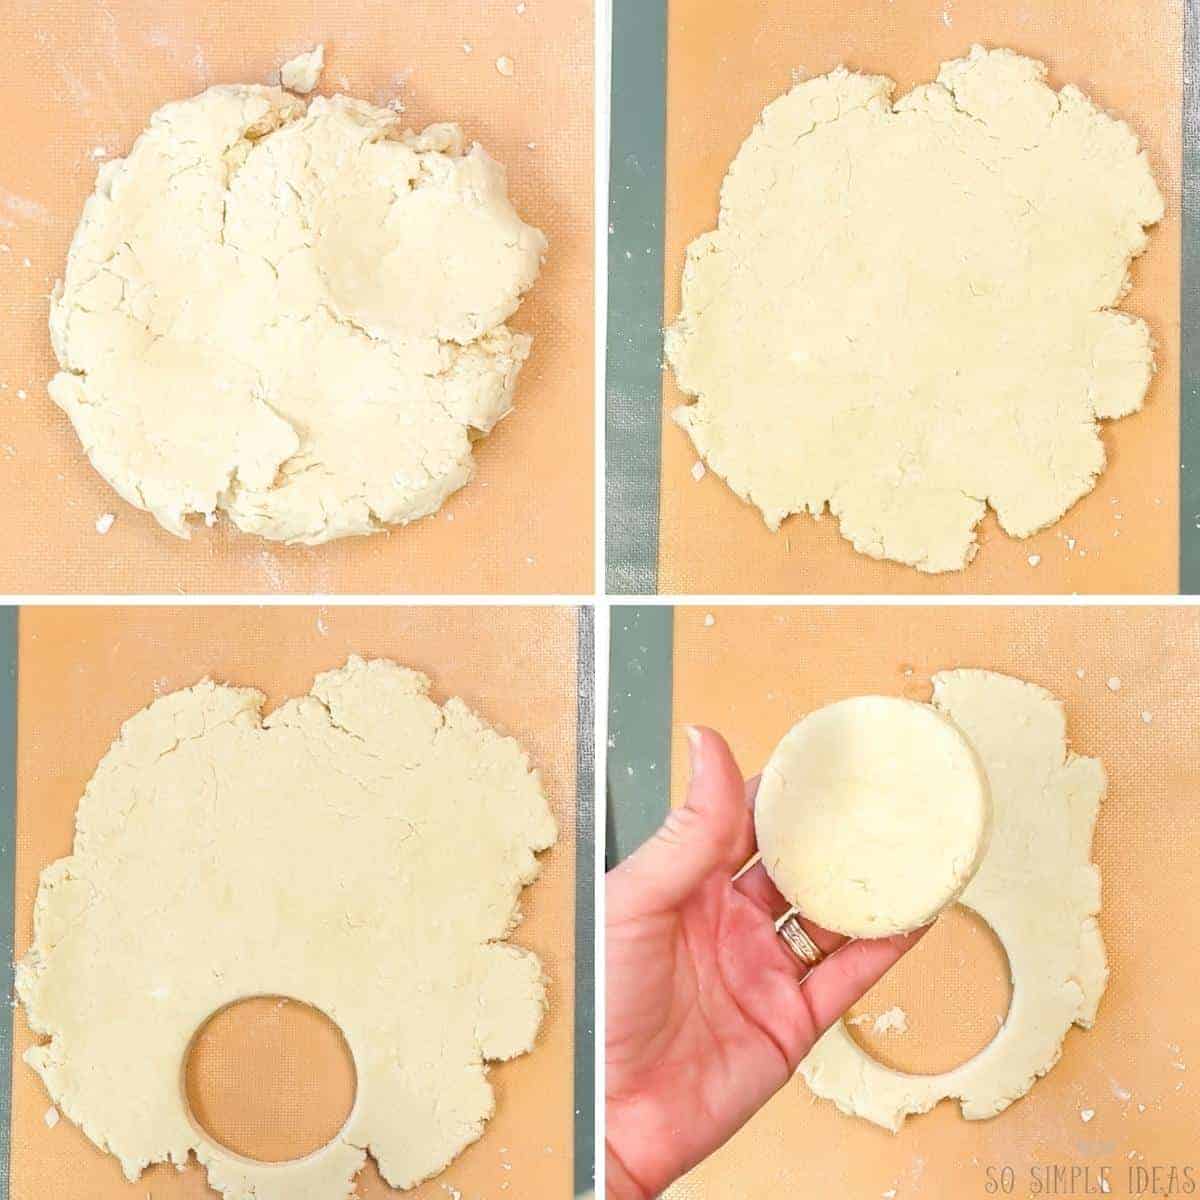 rolling and cutting the dough into biscuits.